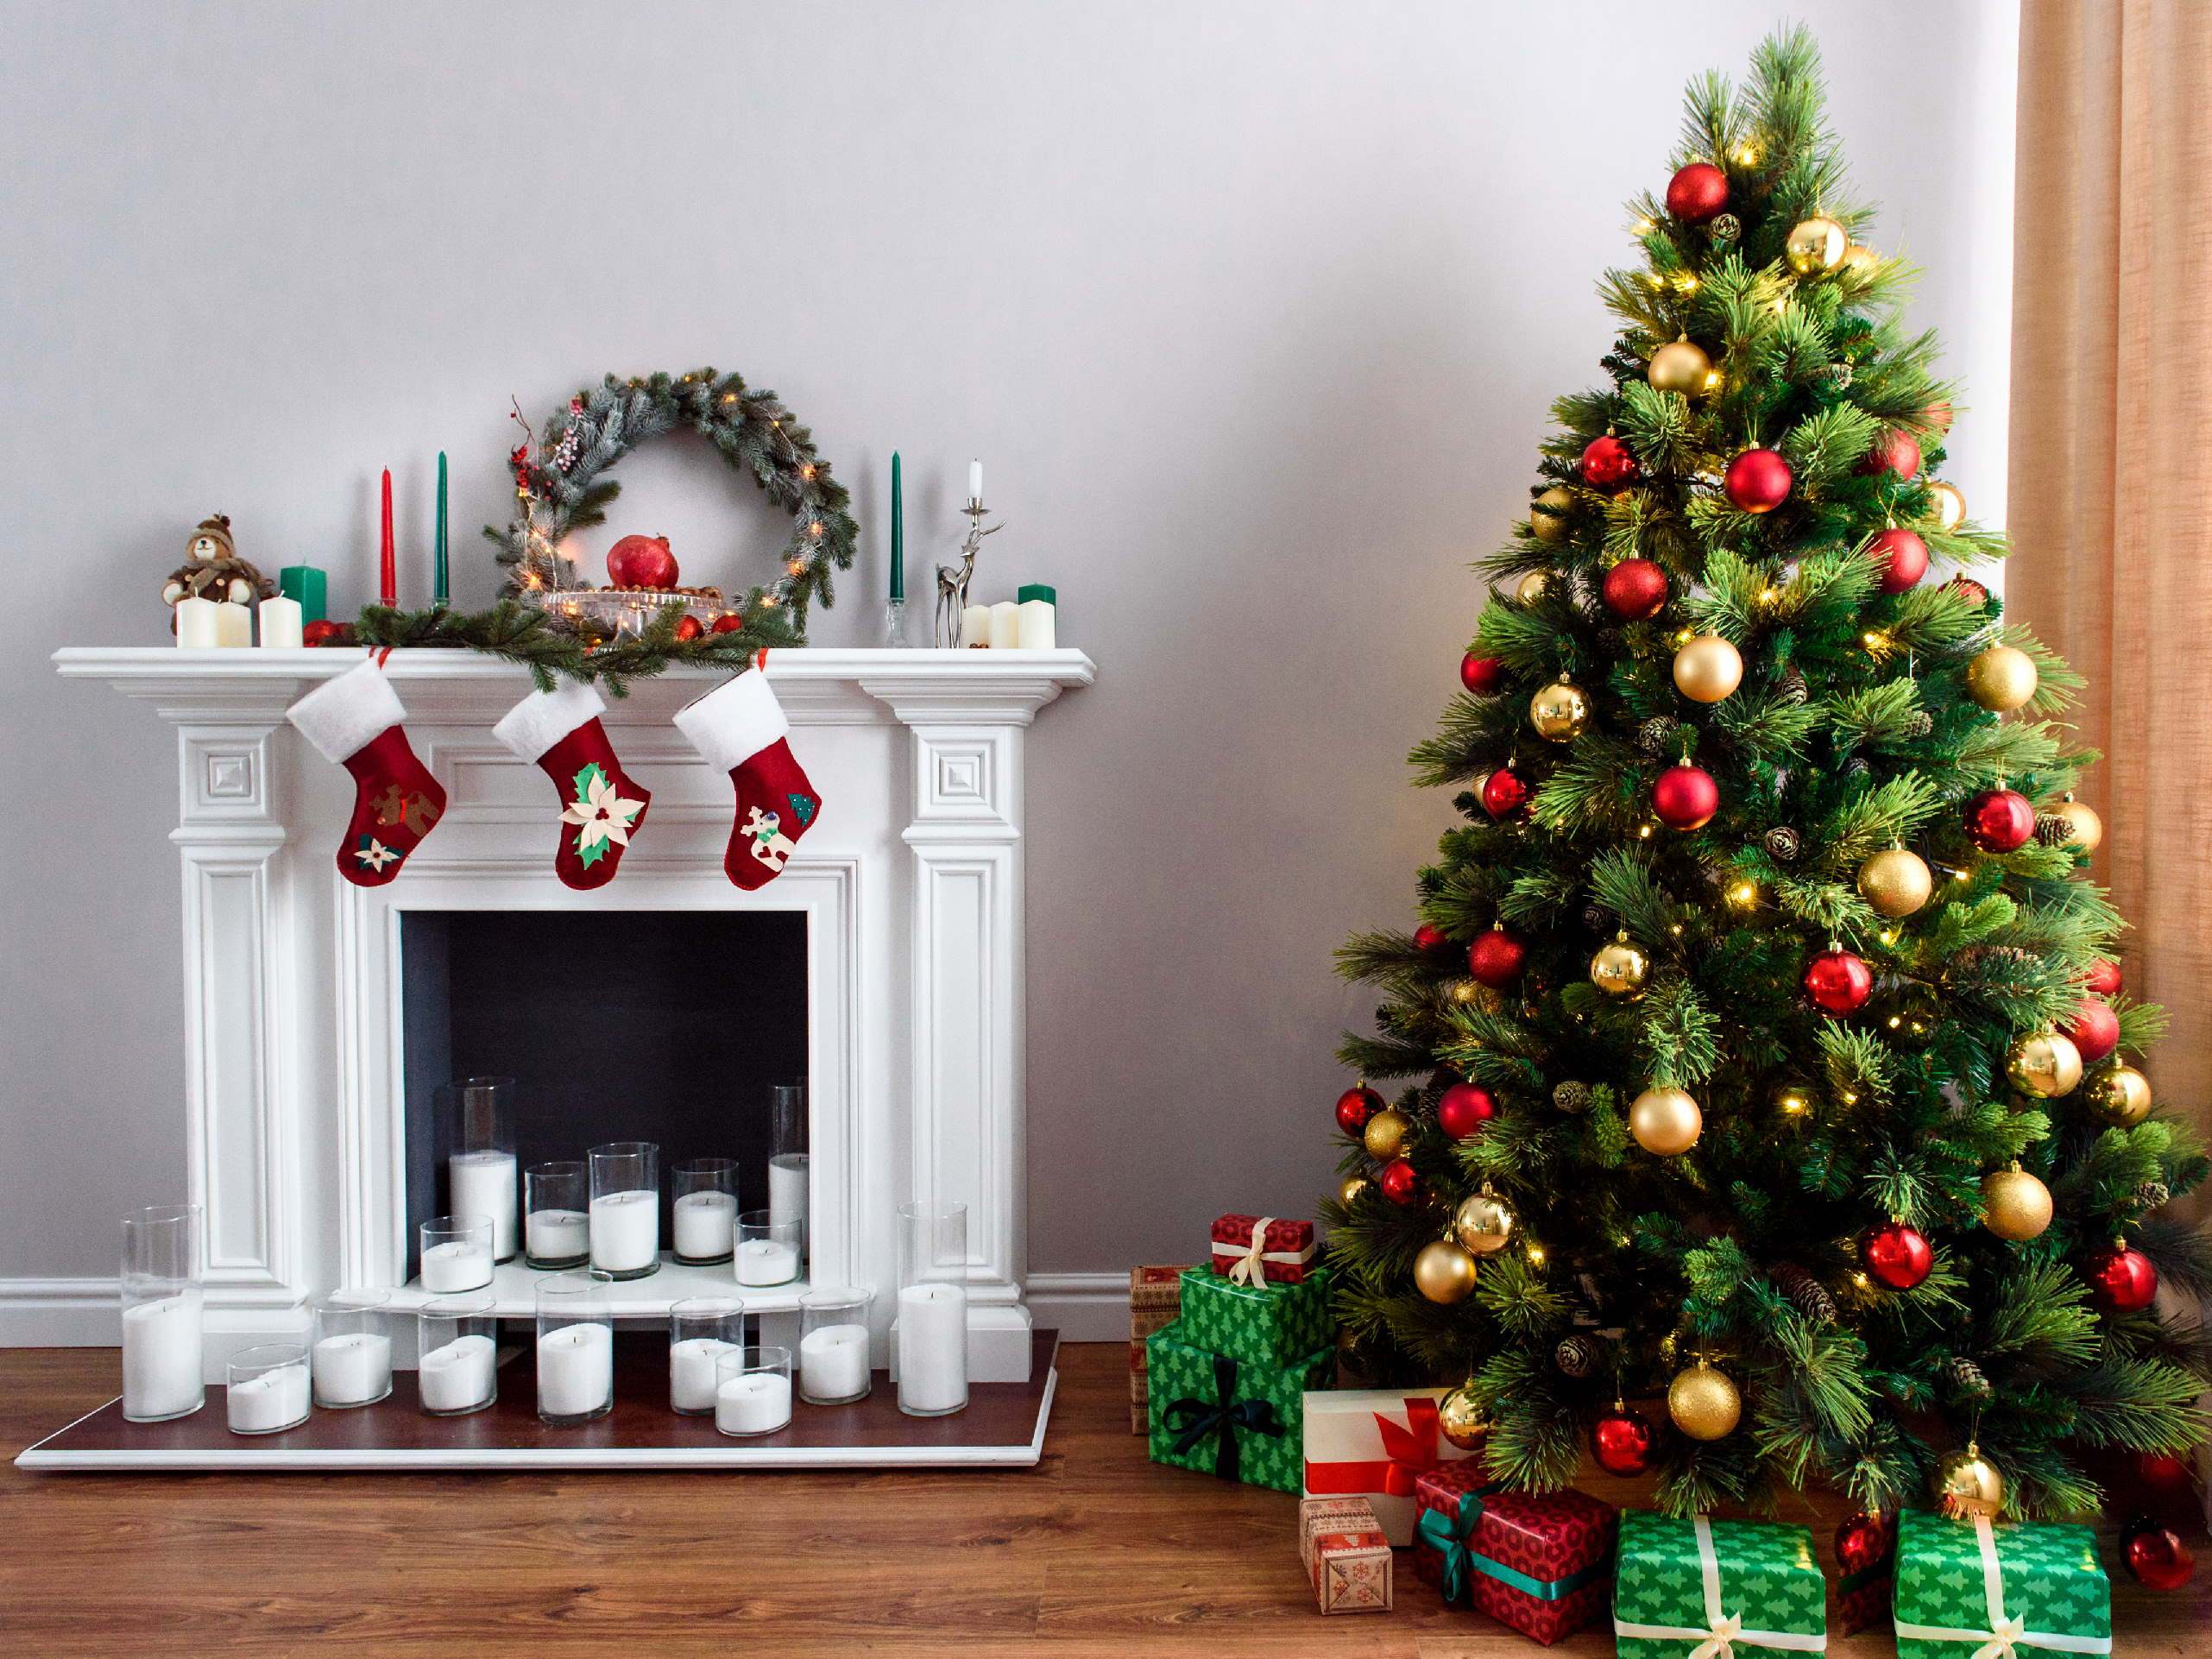 How to choose the perfect Christmas tree for your home